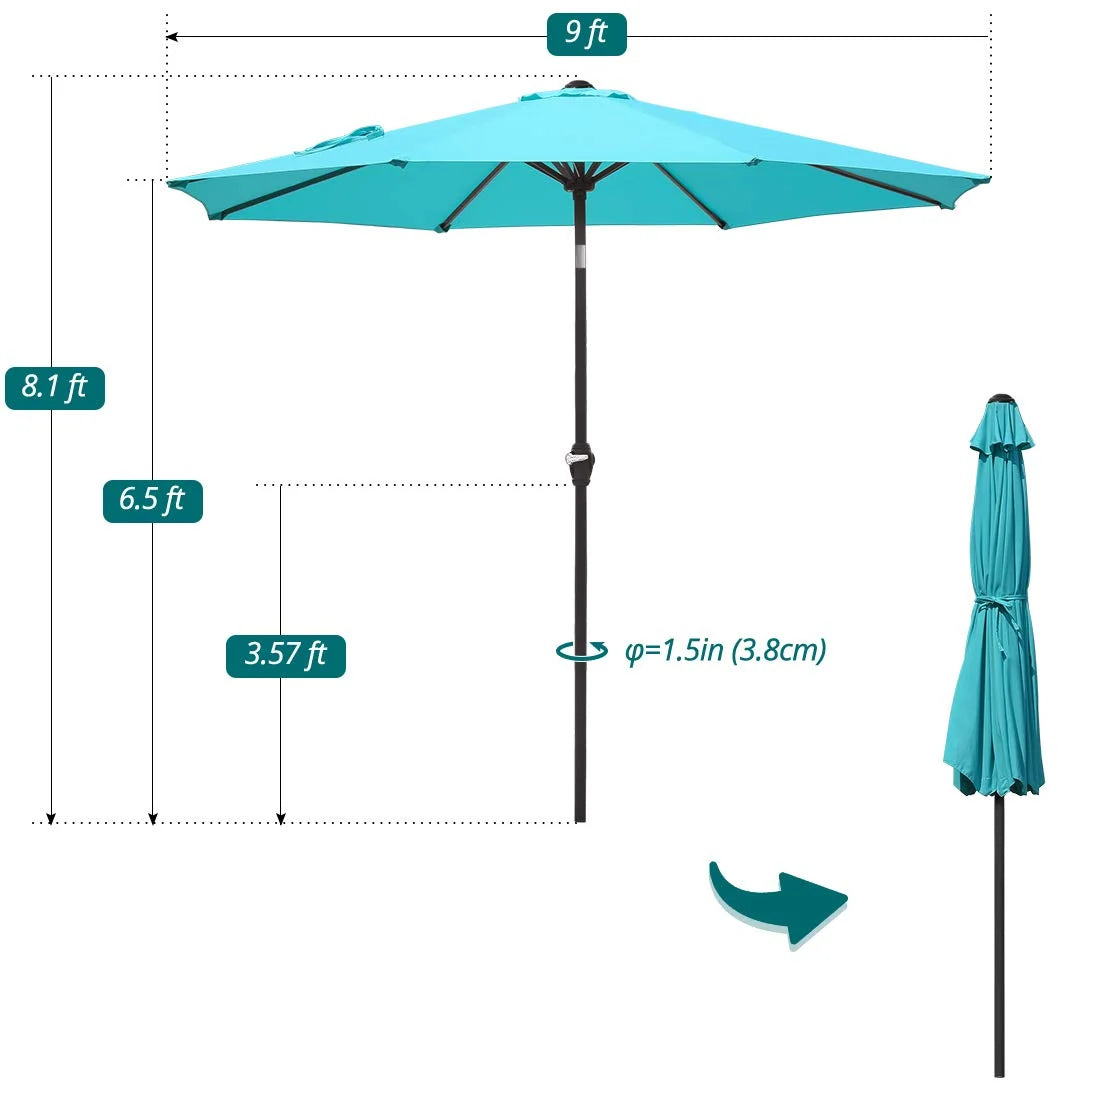 Turquoise 9 ft patio umbrella size#color_turquoise